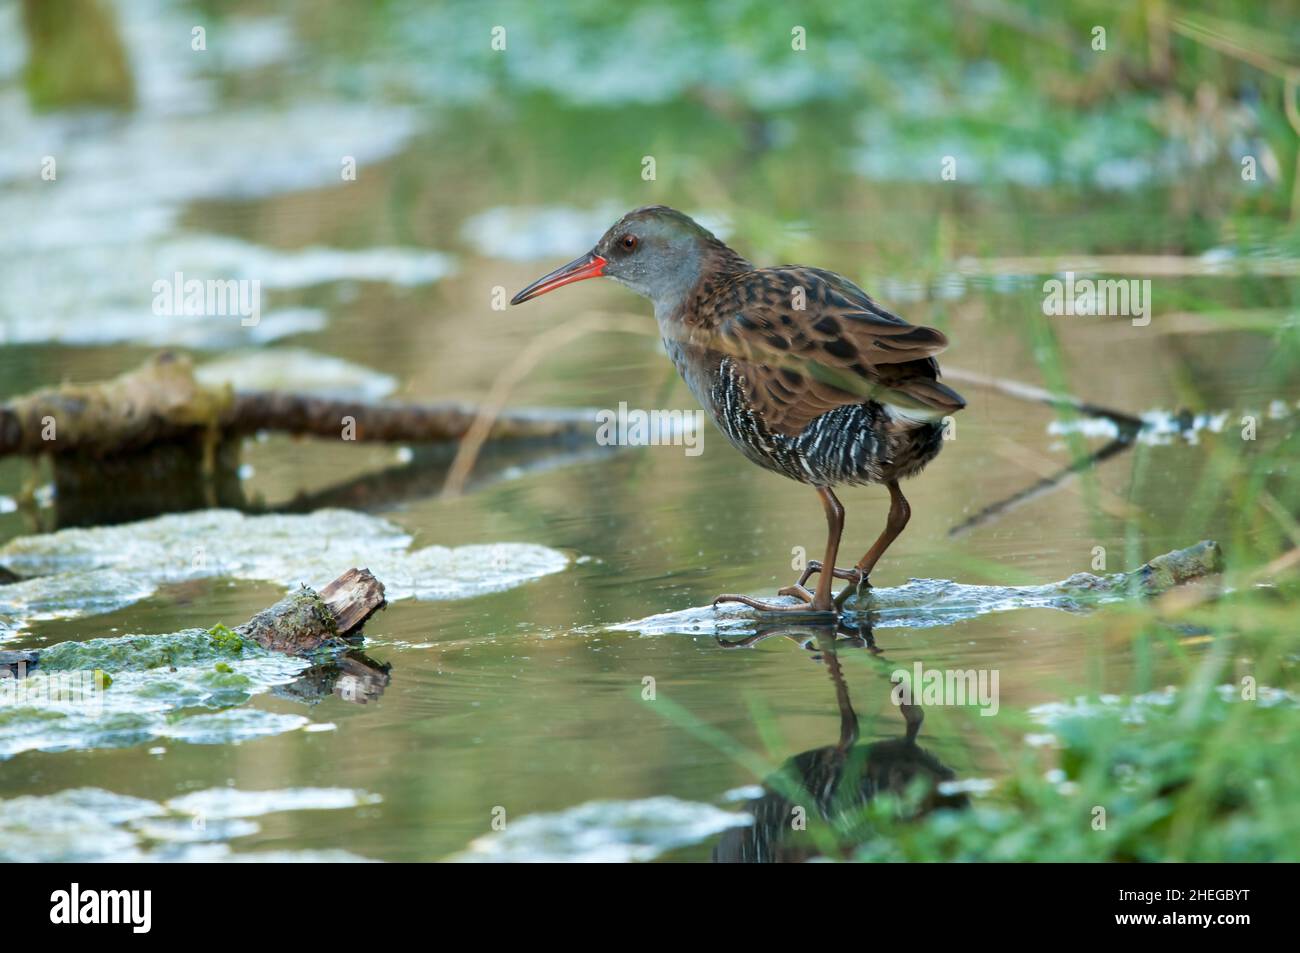 The European rail or common rail is a species of bird in the Rallidae family. Stock Photo